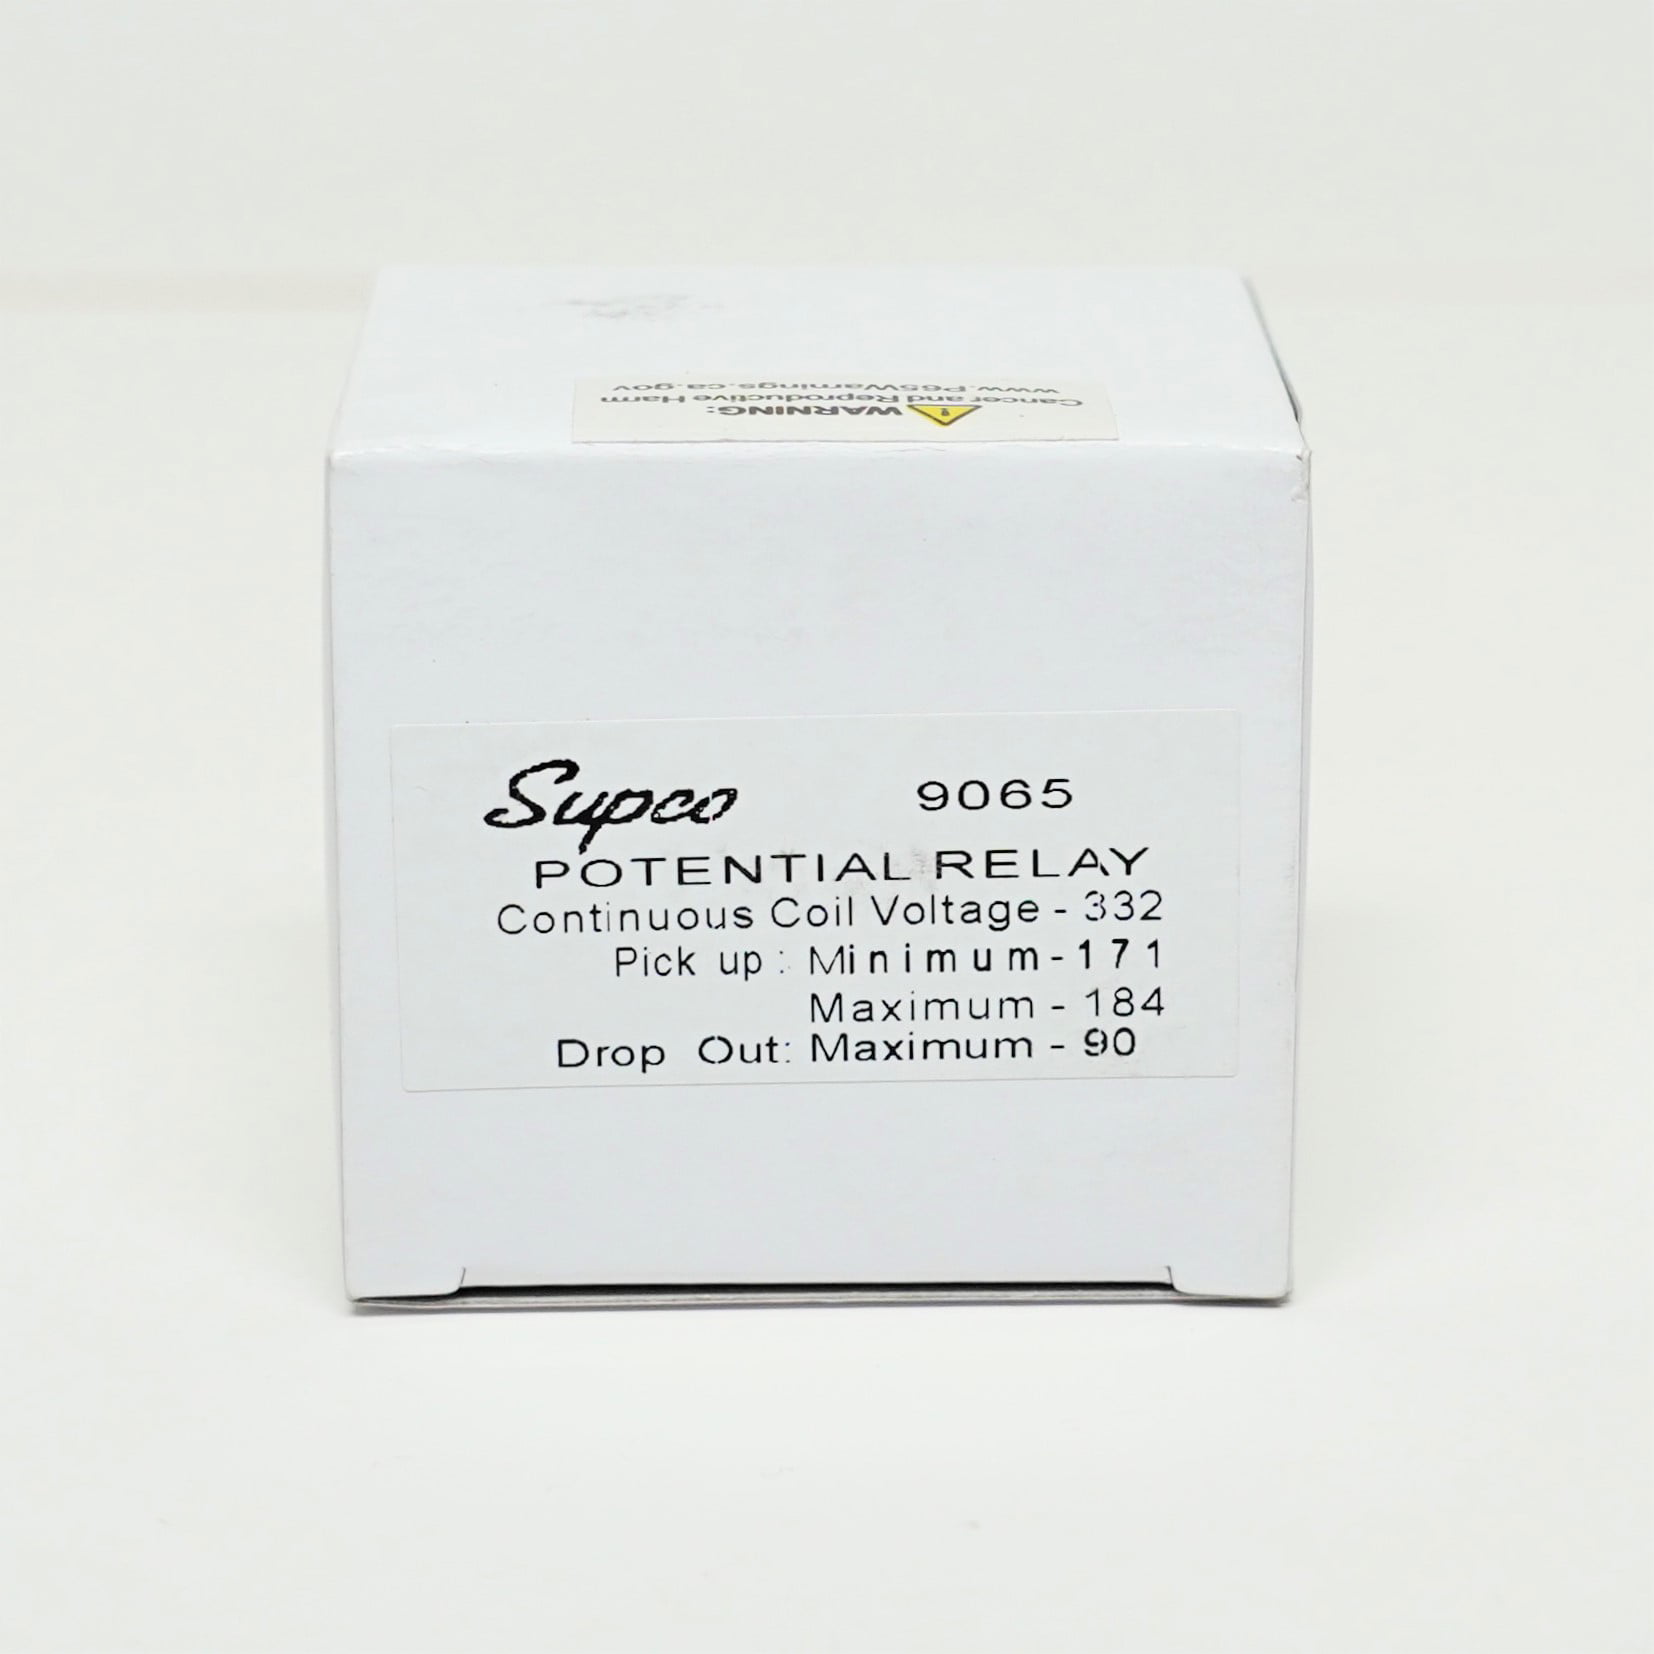 Supco 9065 Potential Relay 332 Continuous Coil Voltage 